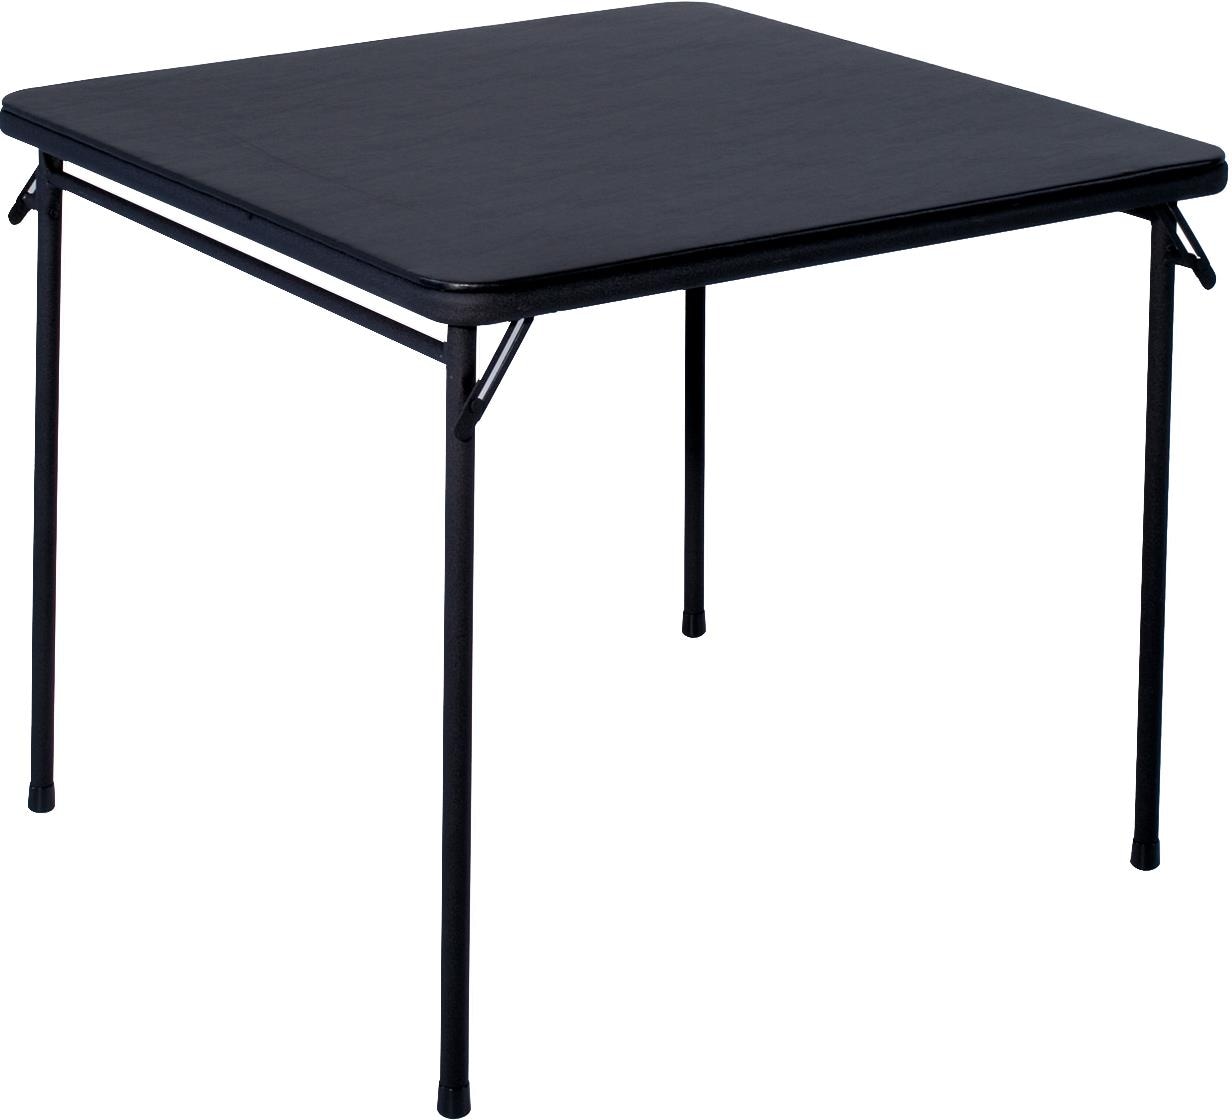 Cosco 3-ft x 3-ft Indoor Square Vinyl Black Folding Dining Table (4-Person)